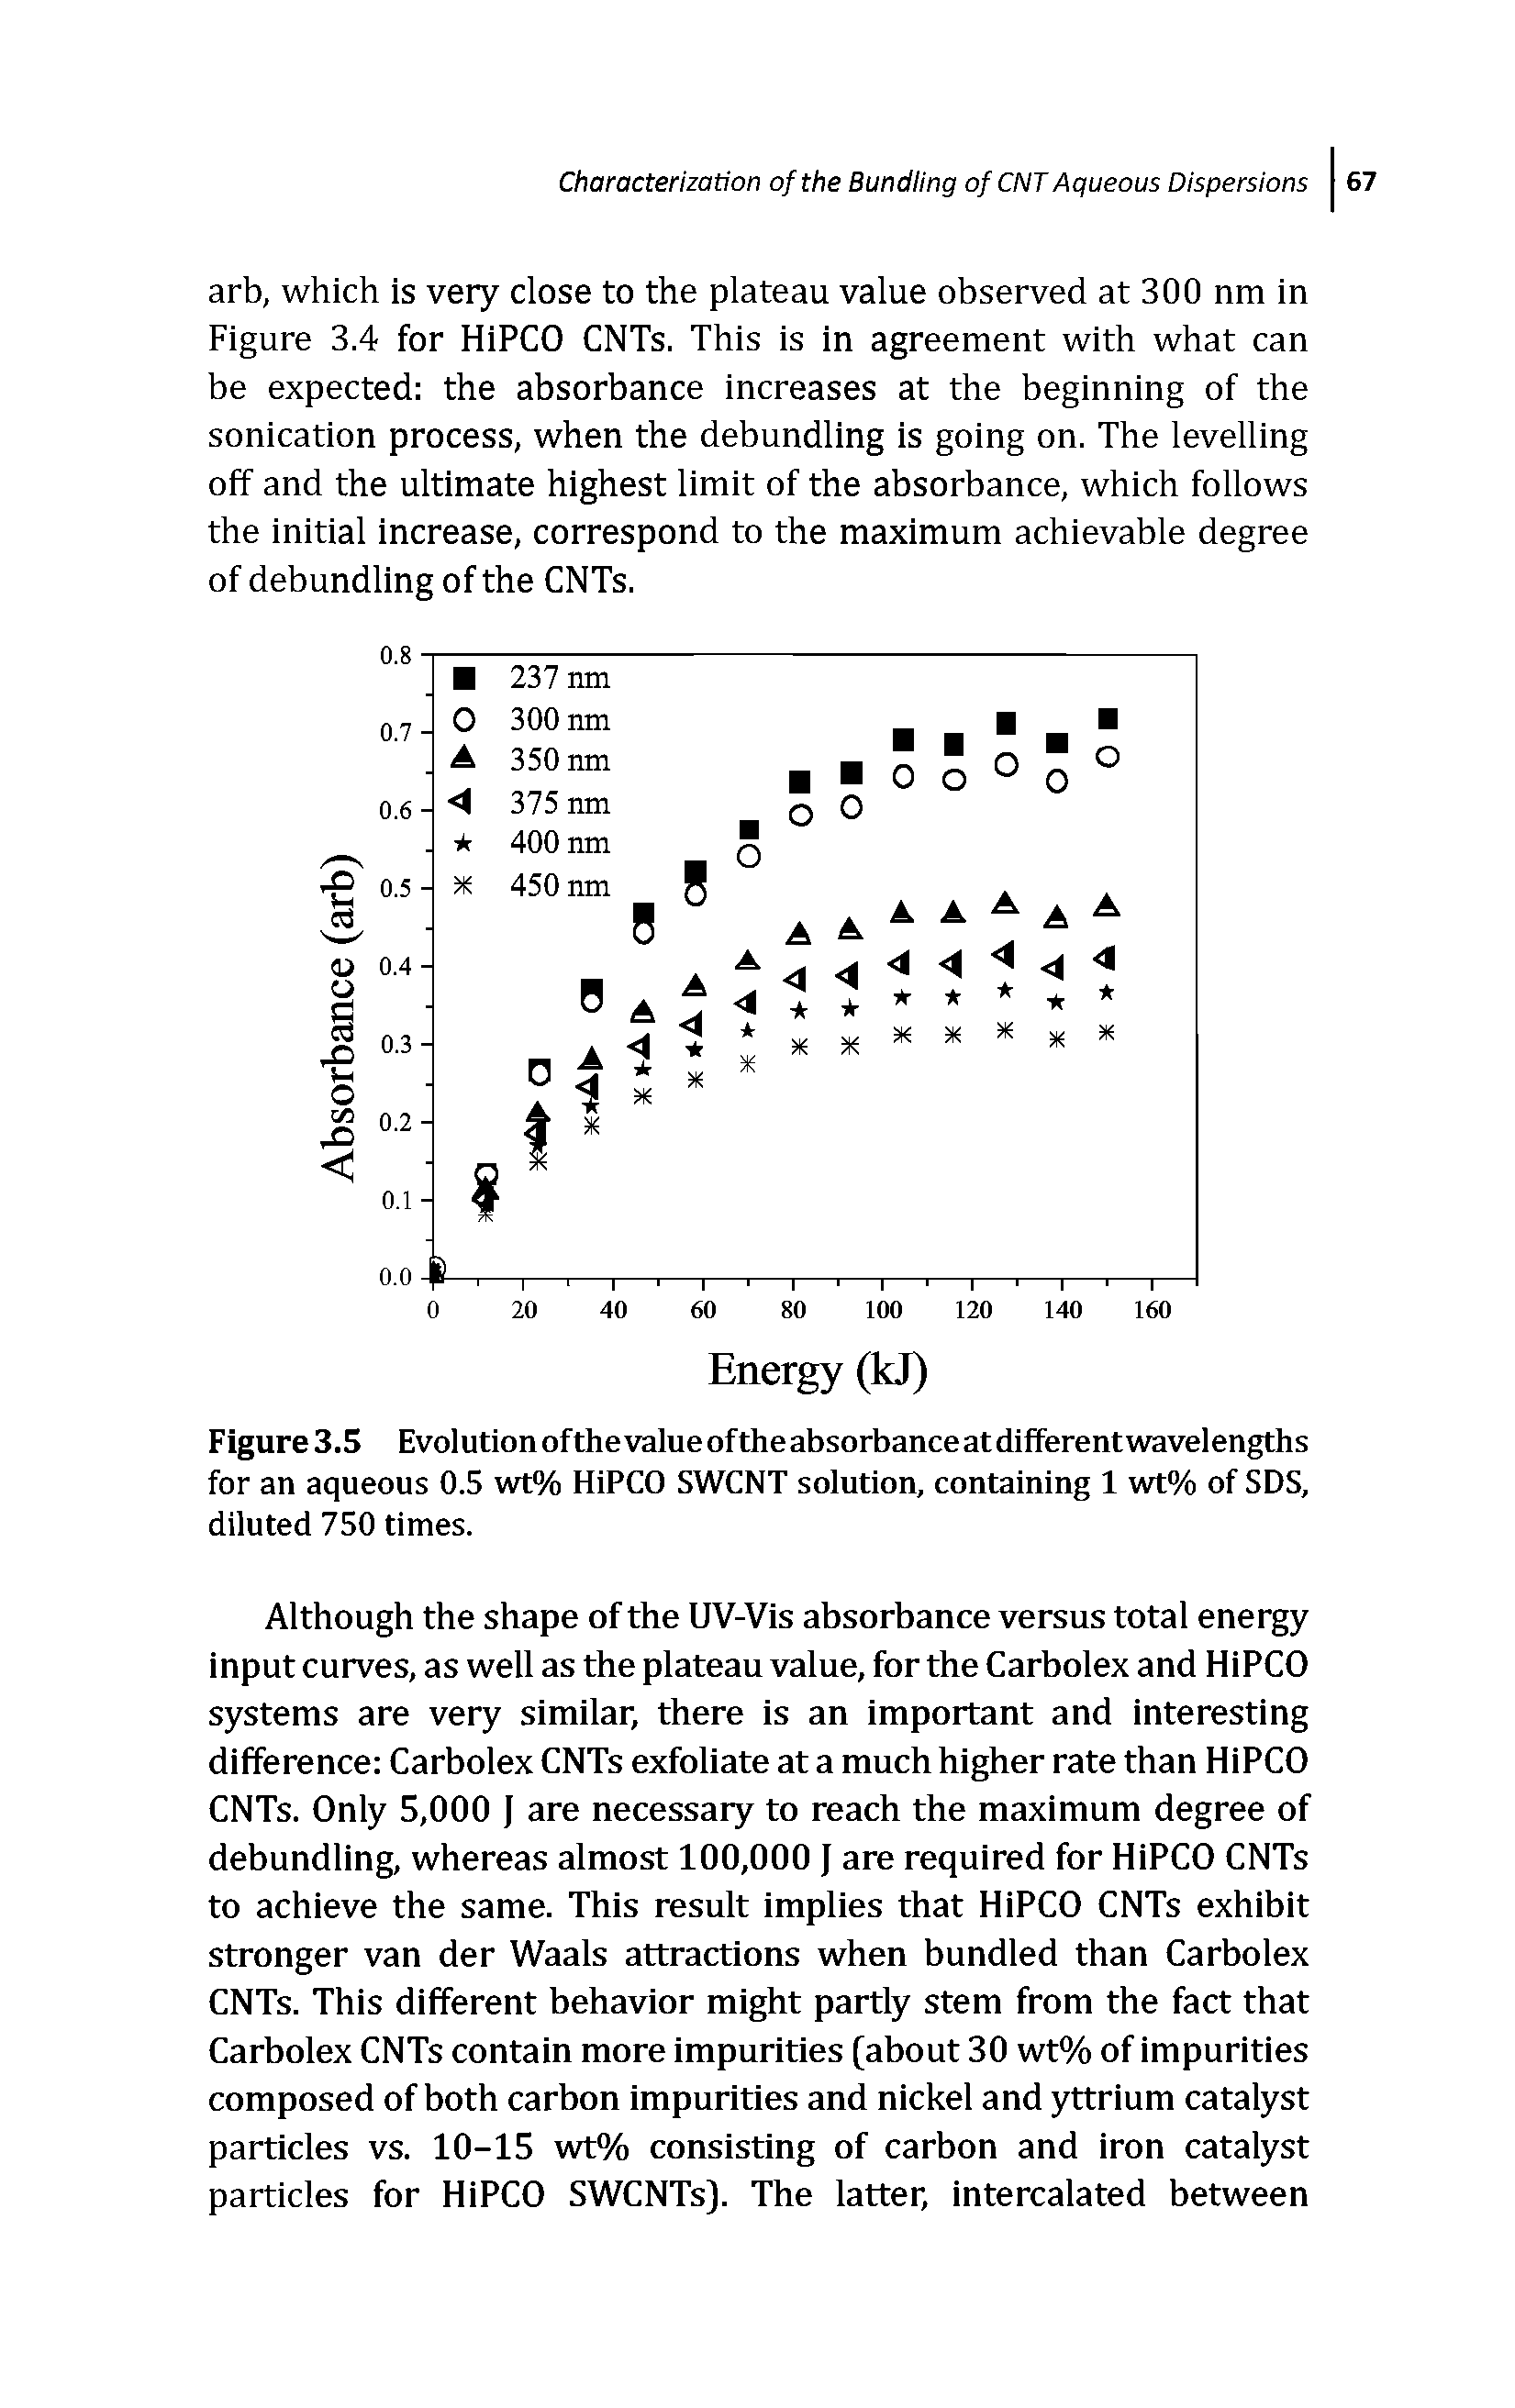 Figure 3.5 Evolution ofthevalueoftheabsorbanceatdifferentwavelengths for an aqueous 0.5 wt% HiPCO SWCNT solution, containing 1 wt% of SDS, diluted 750 times.